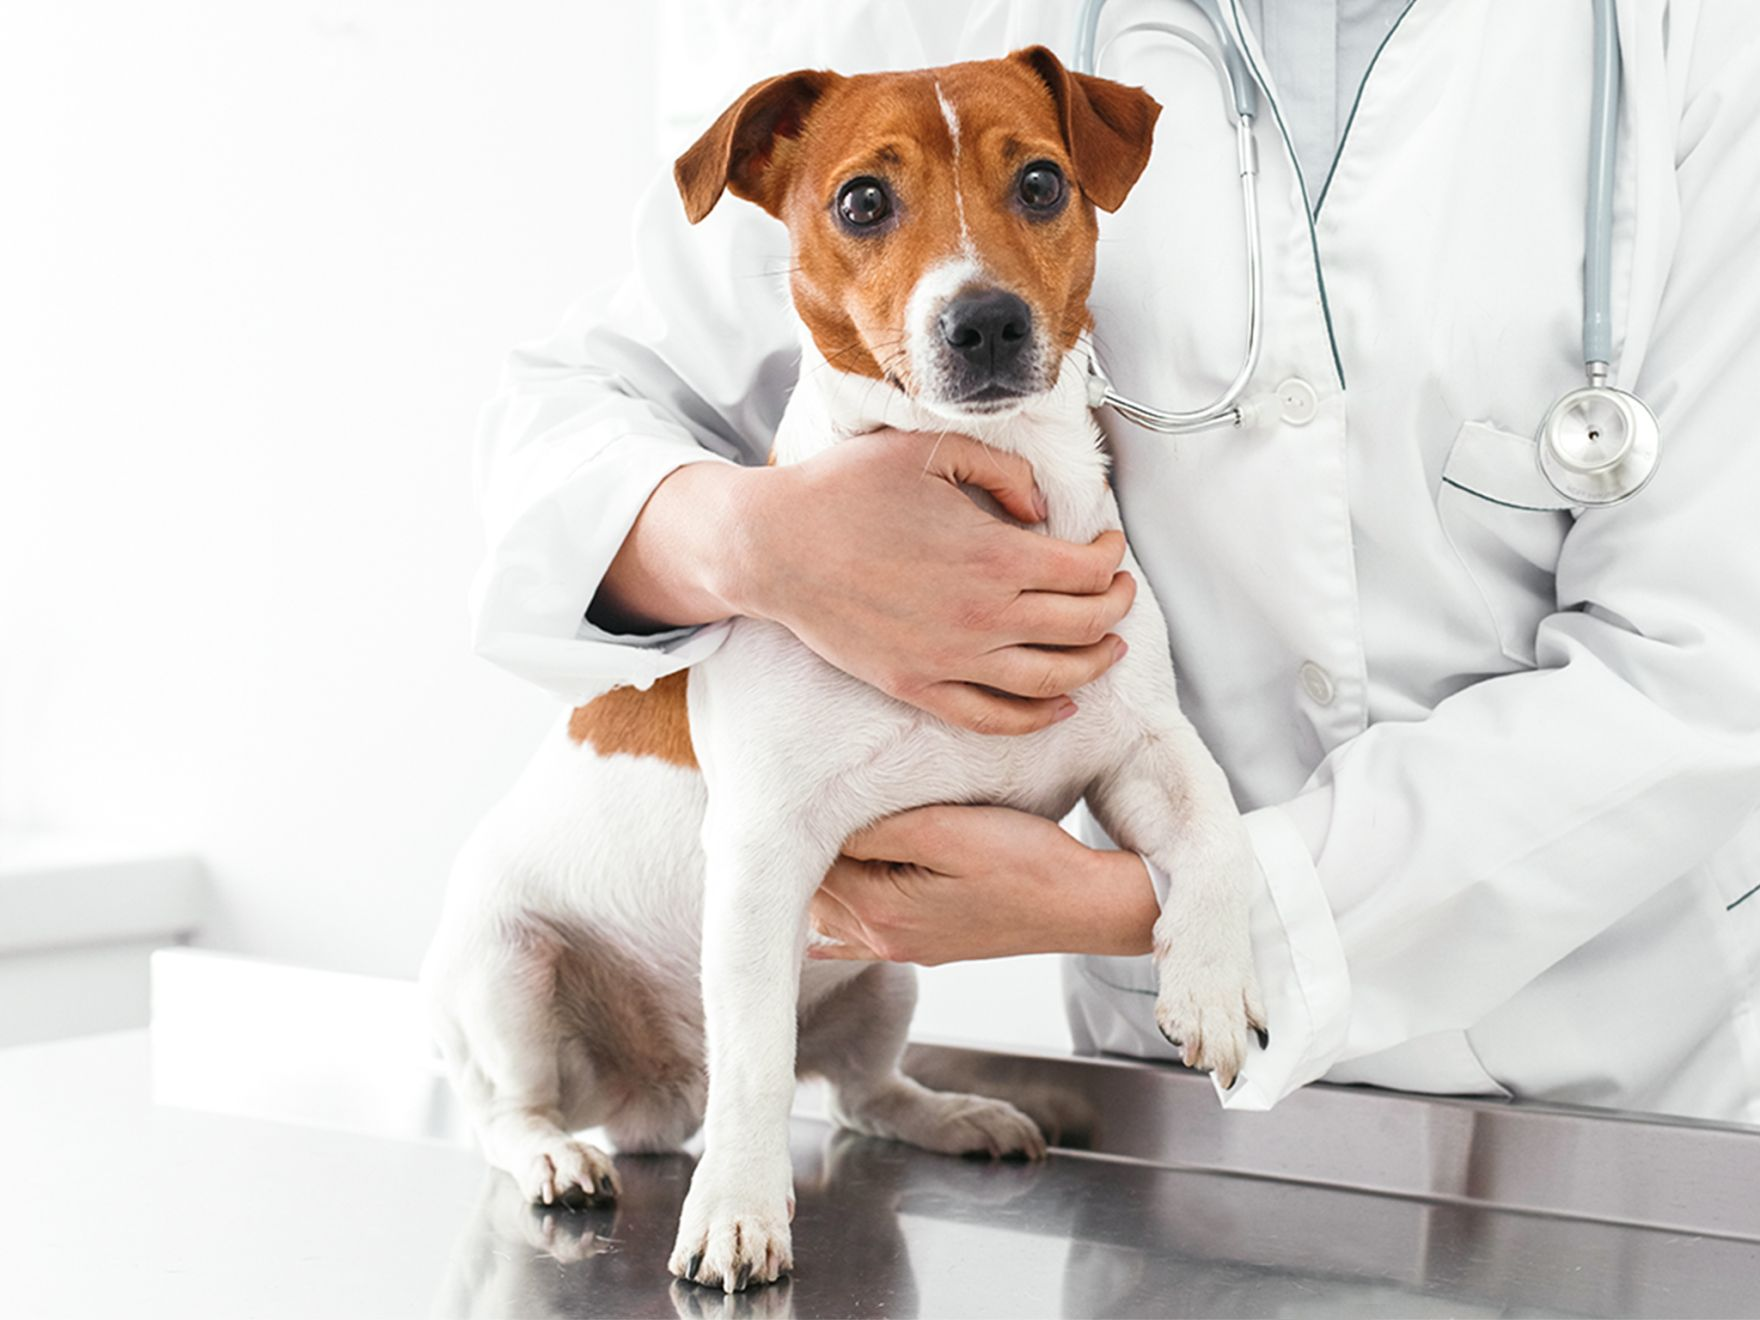 Jack Russel with a vet